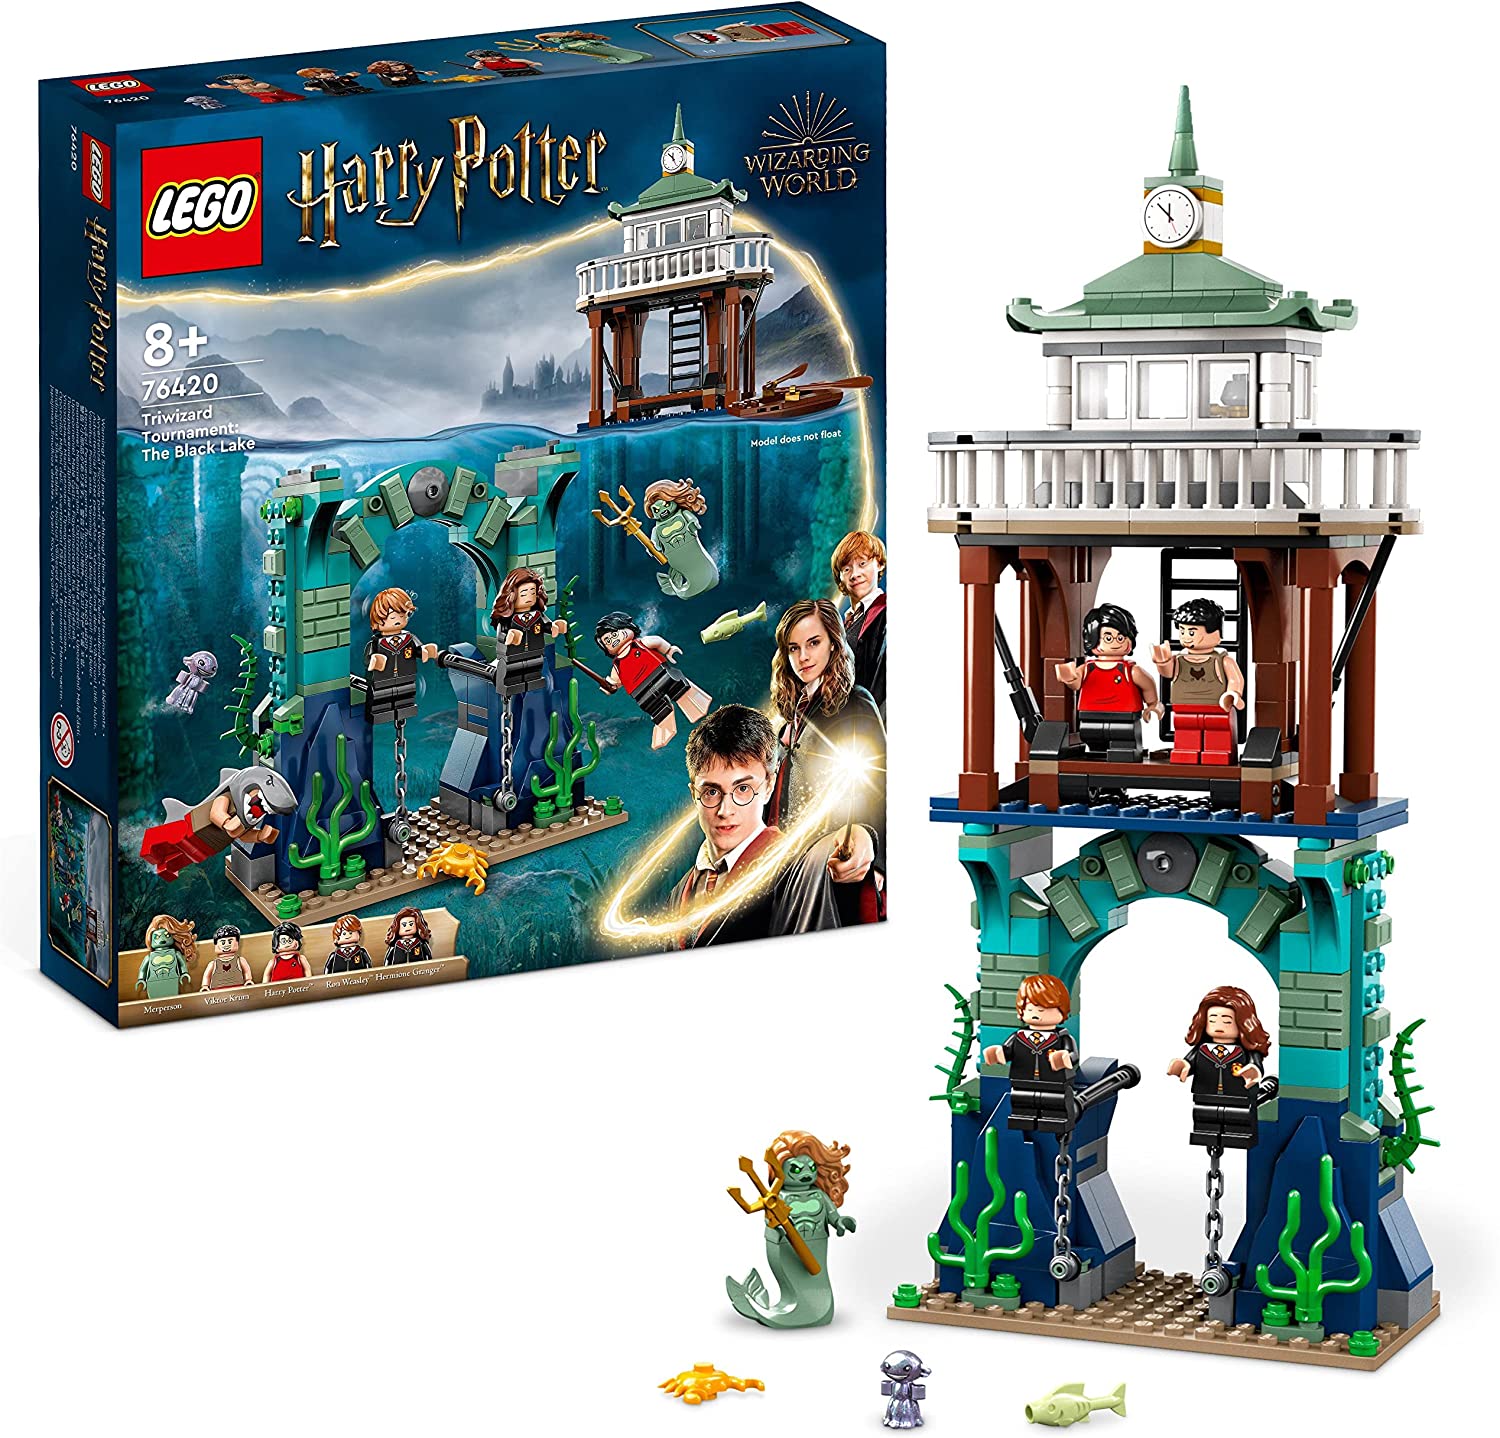 LEGO 76420 Harry Potter Trimagical Tournament: The Black Lake, Goblet Fire Toy for Children, Boys & Girls from 8 Years with Boat Toy and 5 Mini Figures